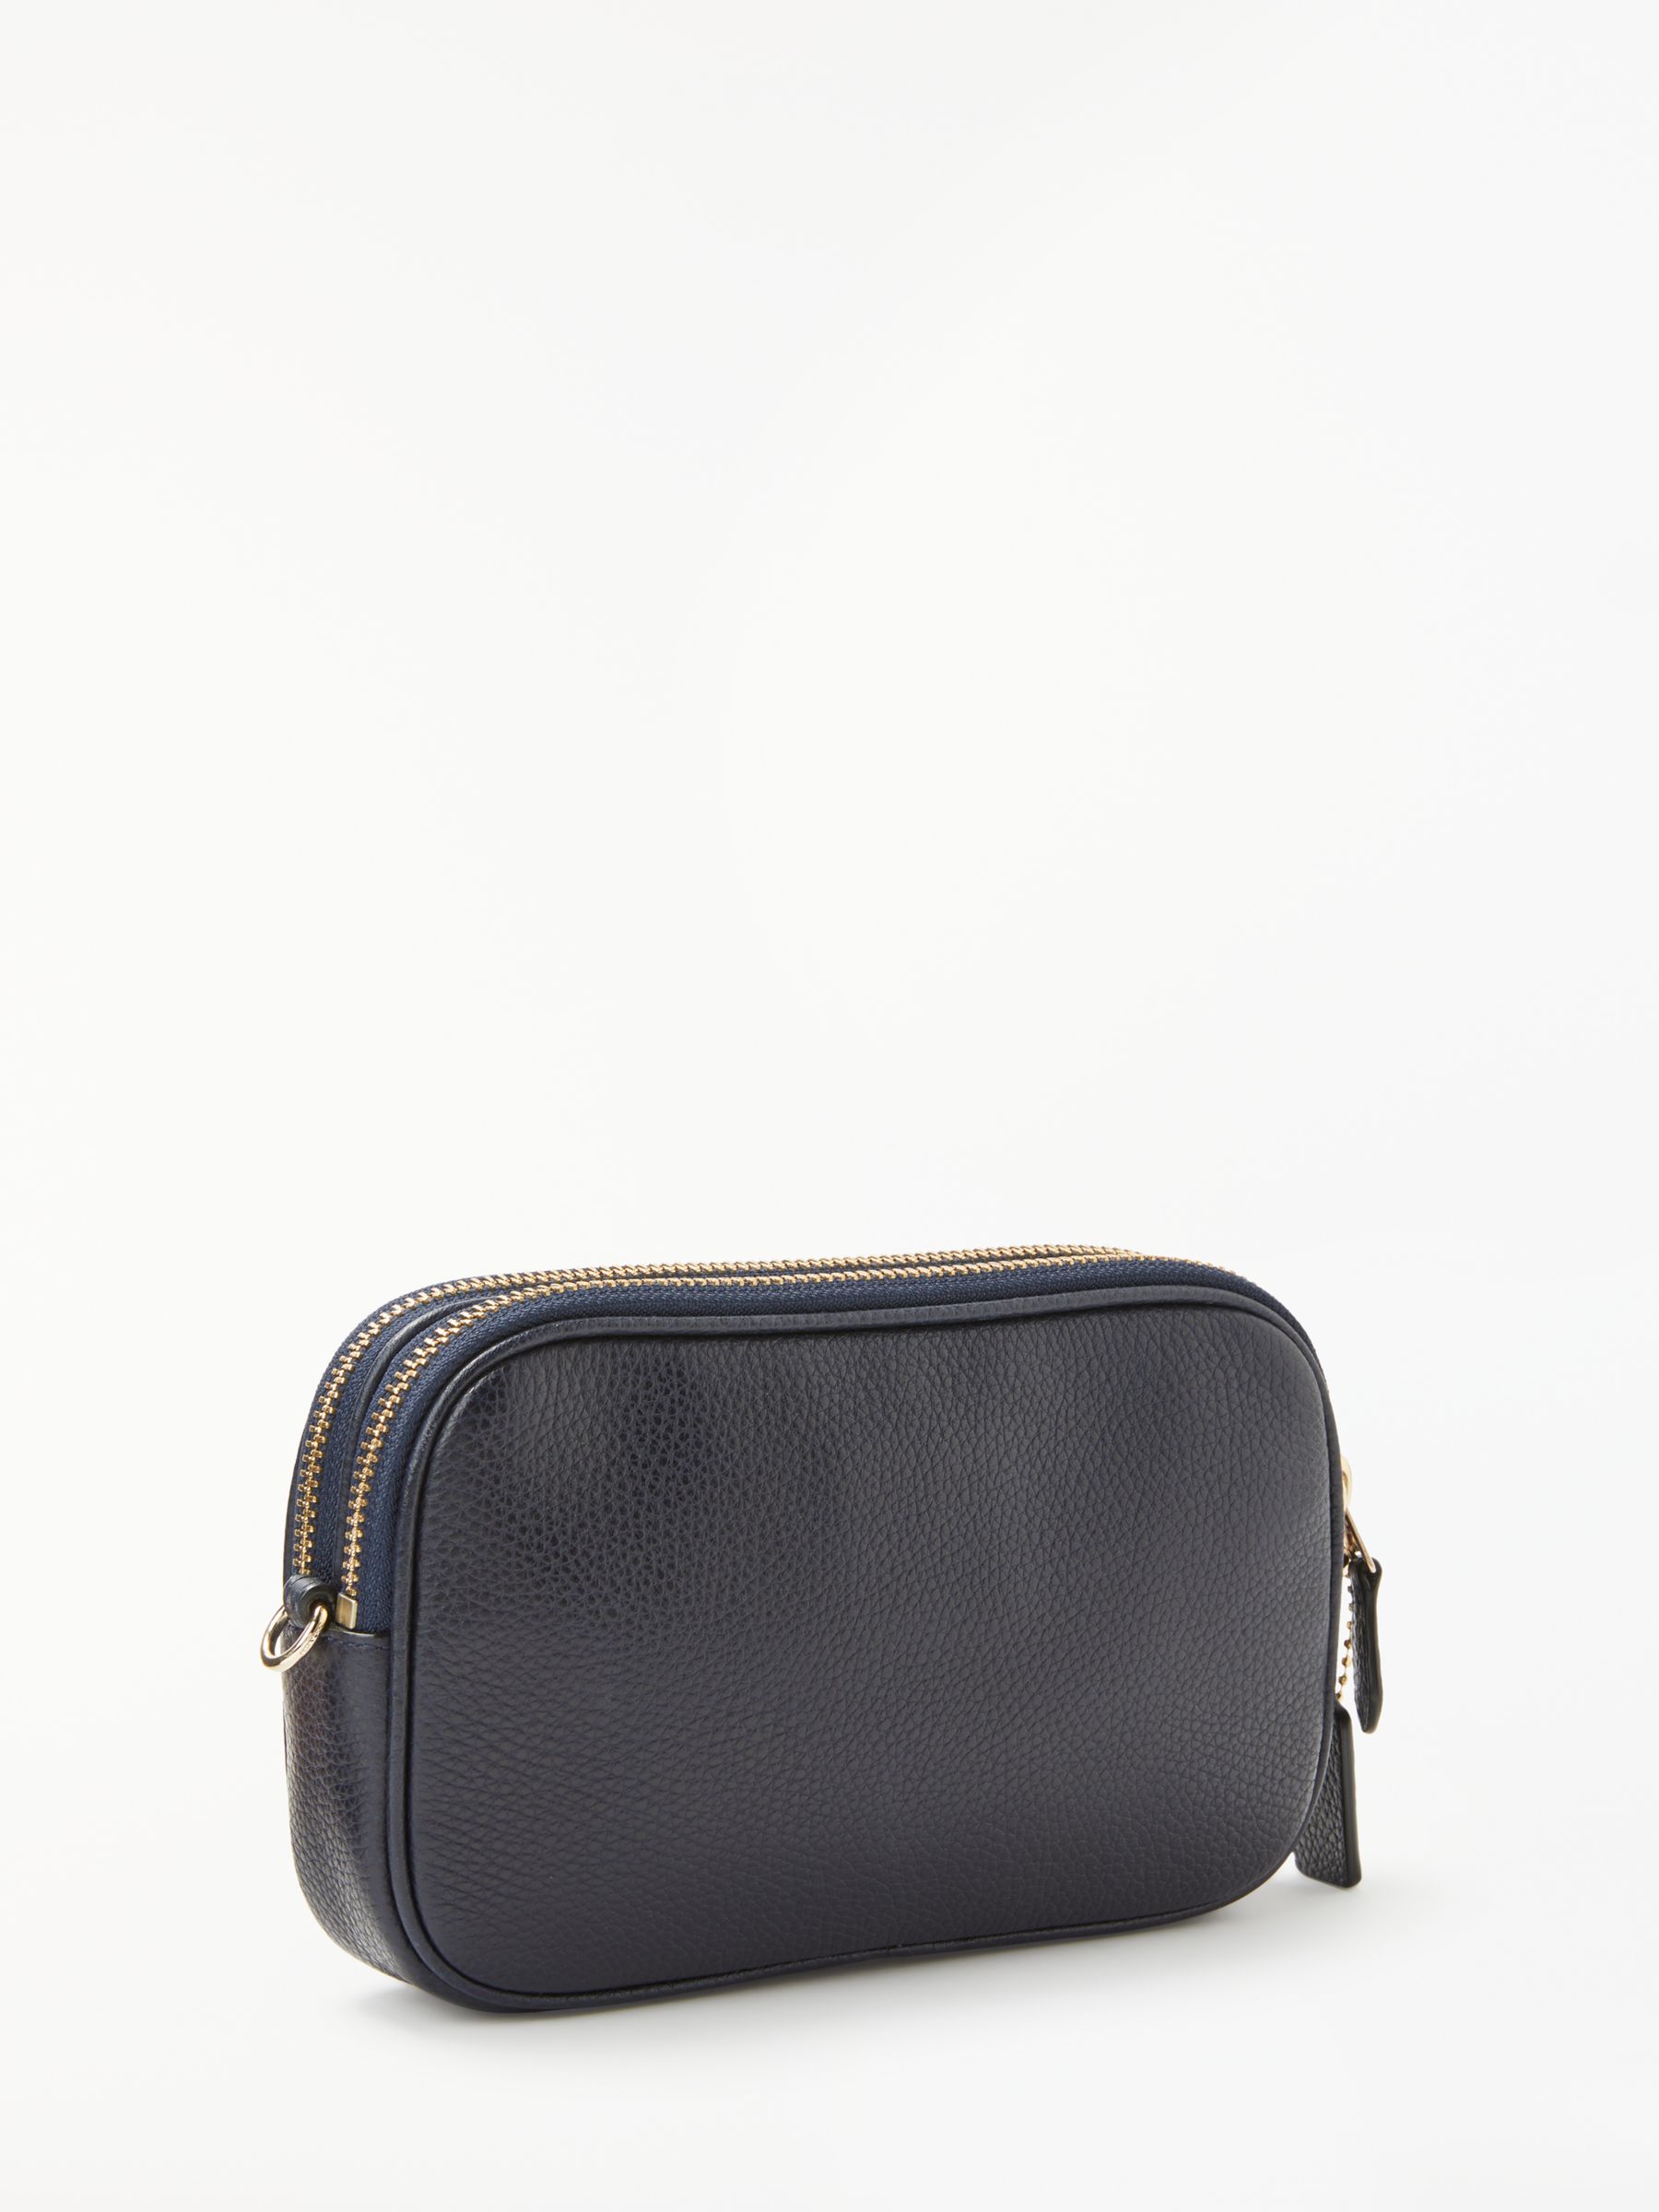 Coach Pebble Leather Cross Body Clutch Bag at John Lewis